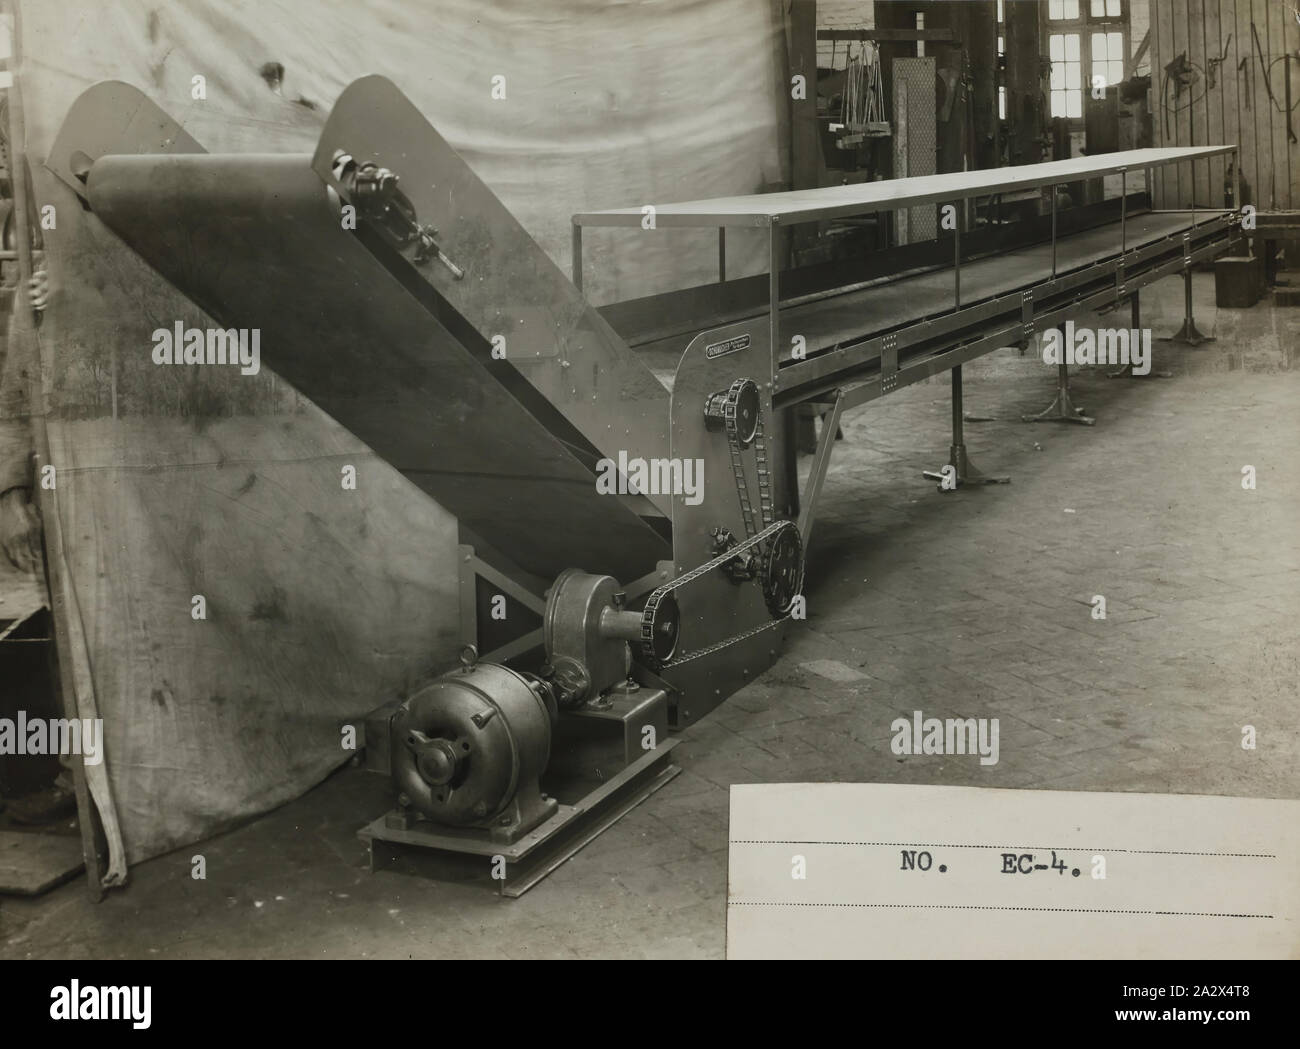 Photograph - Schumacher Mill Furnishing Works, Conveyor, Port Melbourne, Victoria, 1929, Black and white promotional image of a conveyor. It is part of a collection of photographs and marked printer's copy used in the preparation of trade literature promoting products manufactured by the Schumacher Mill Furnishing Works Pty Ltd. The items were originally housed in a wooden filing drawer Stock Photo